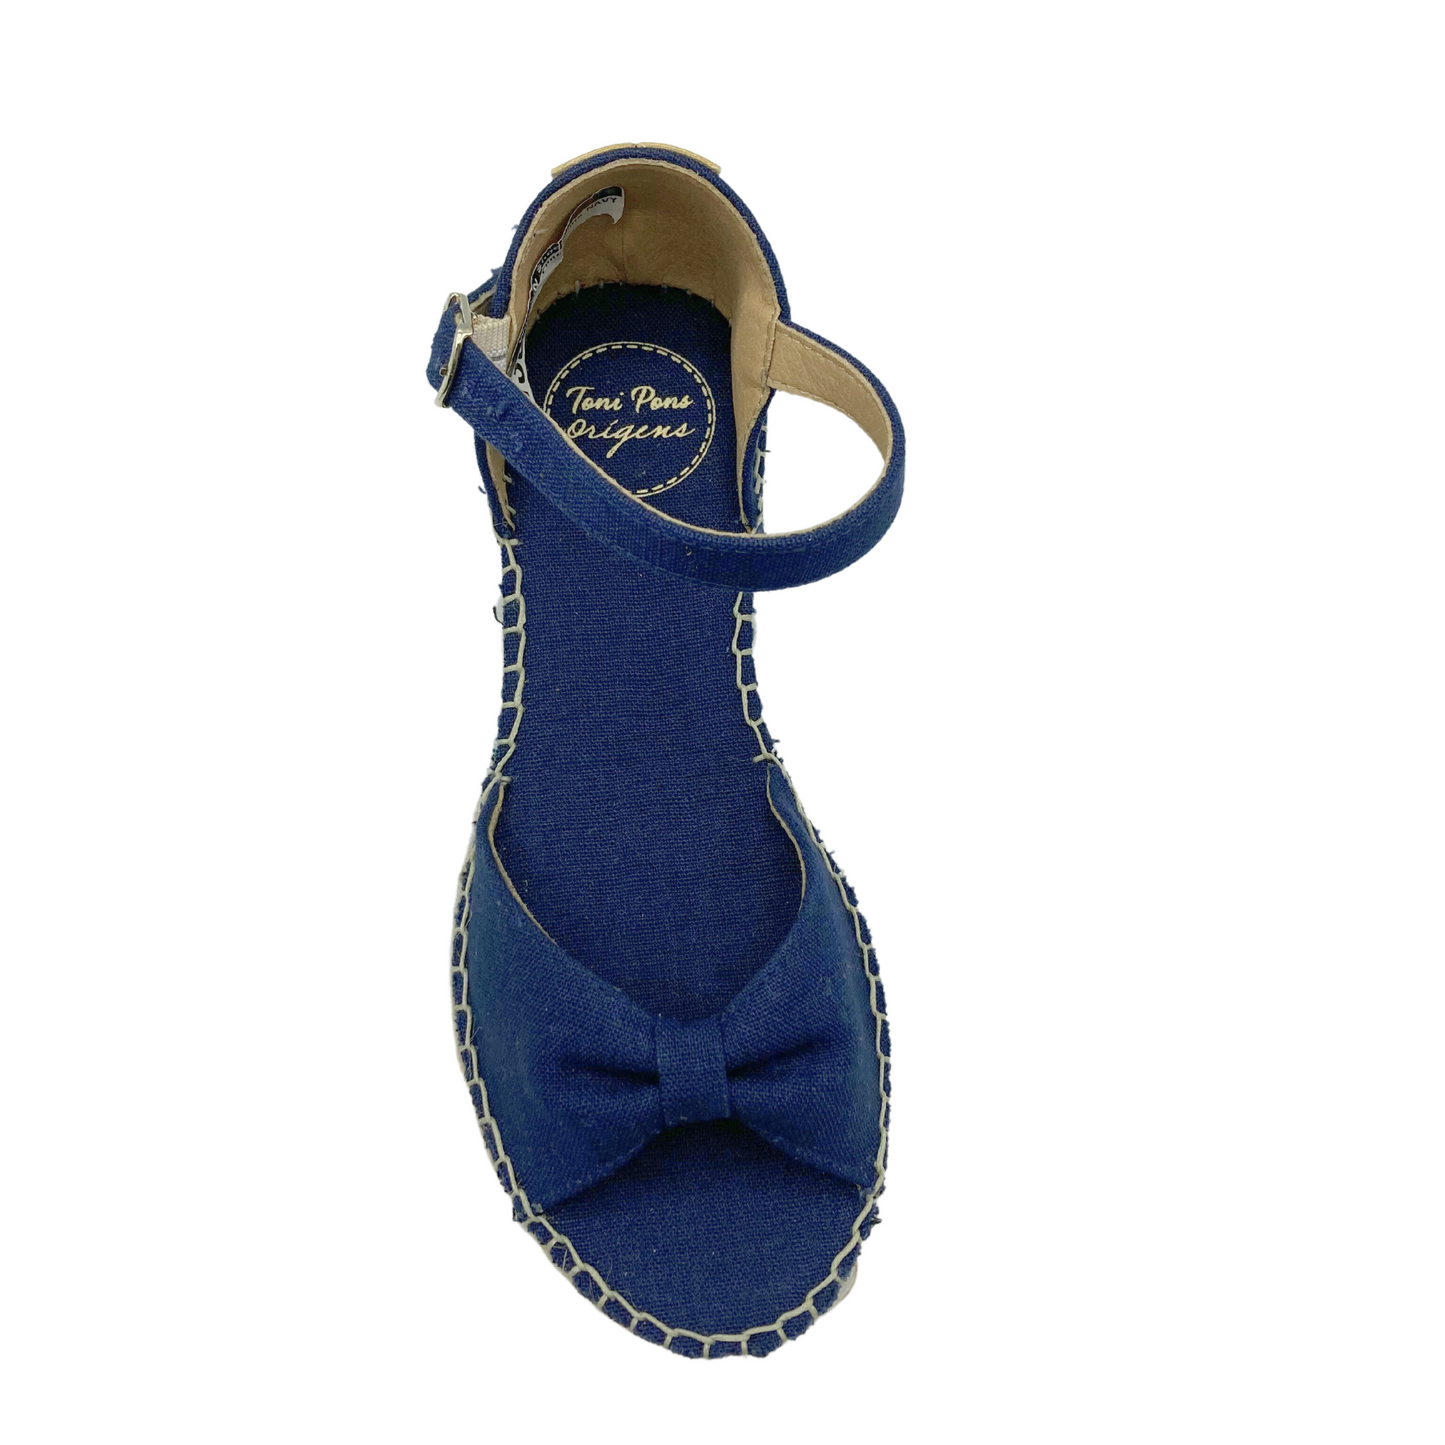 Top down view of a blue sandal with open toe and closed heel